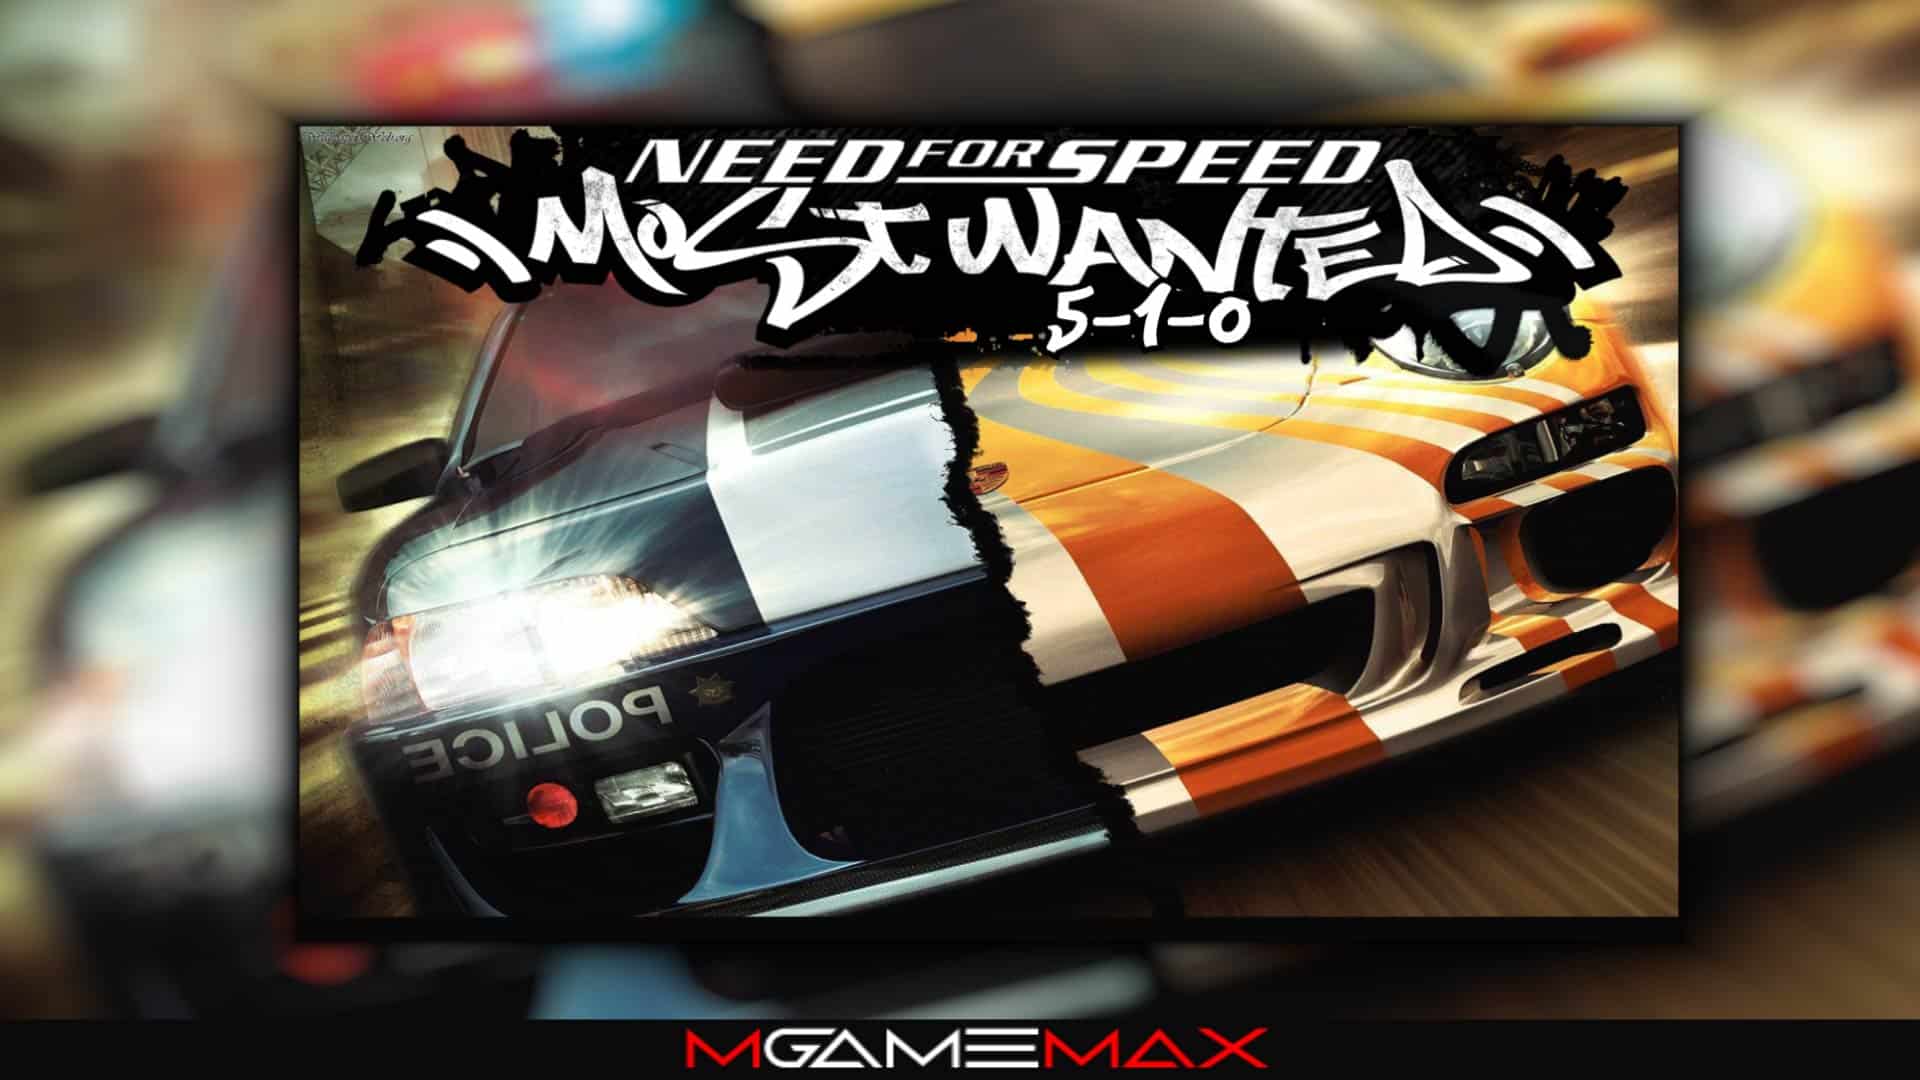 [174MB] Need For Speed - Most Wanted 5-1-0 ROM - PSP Download